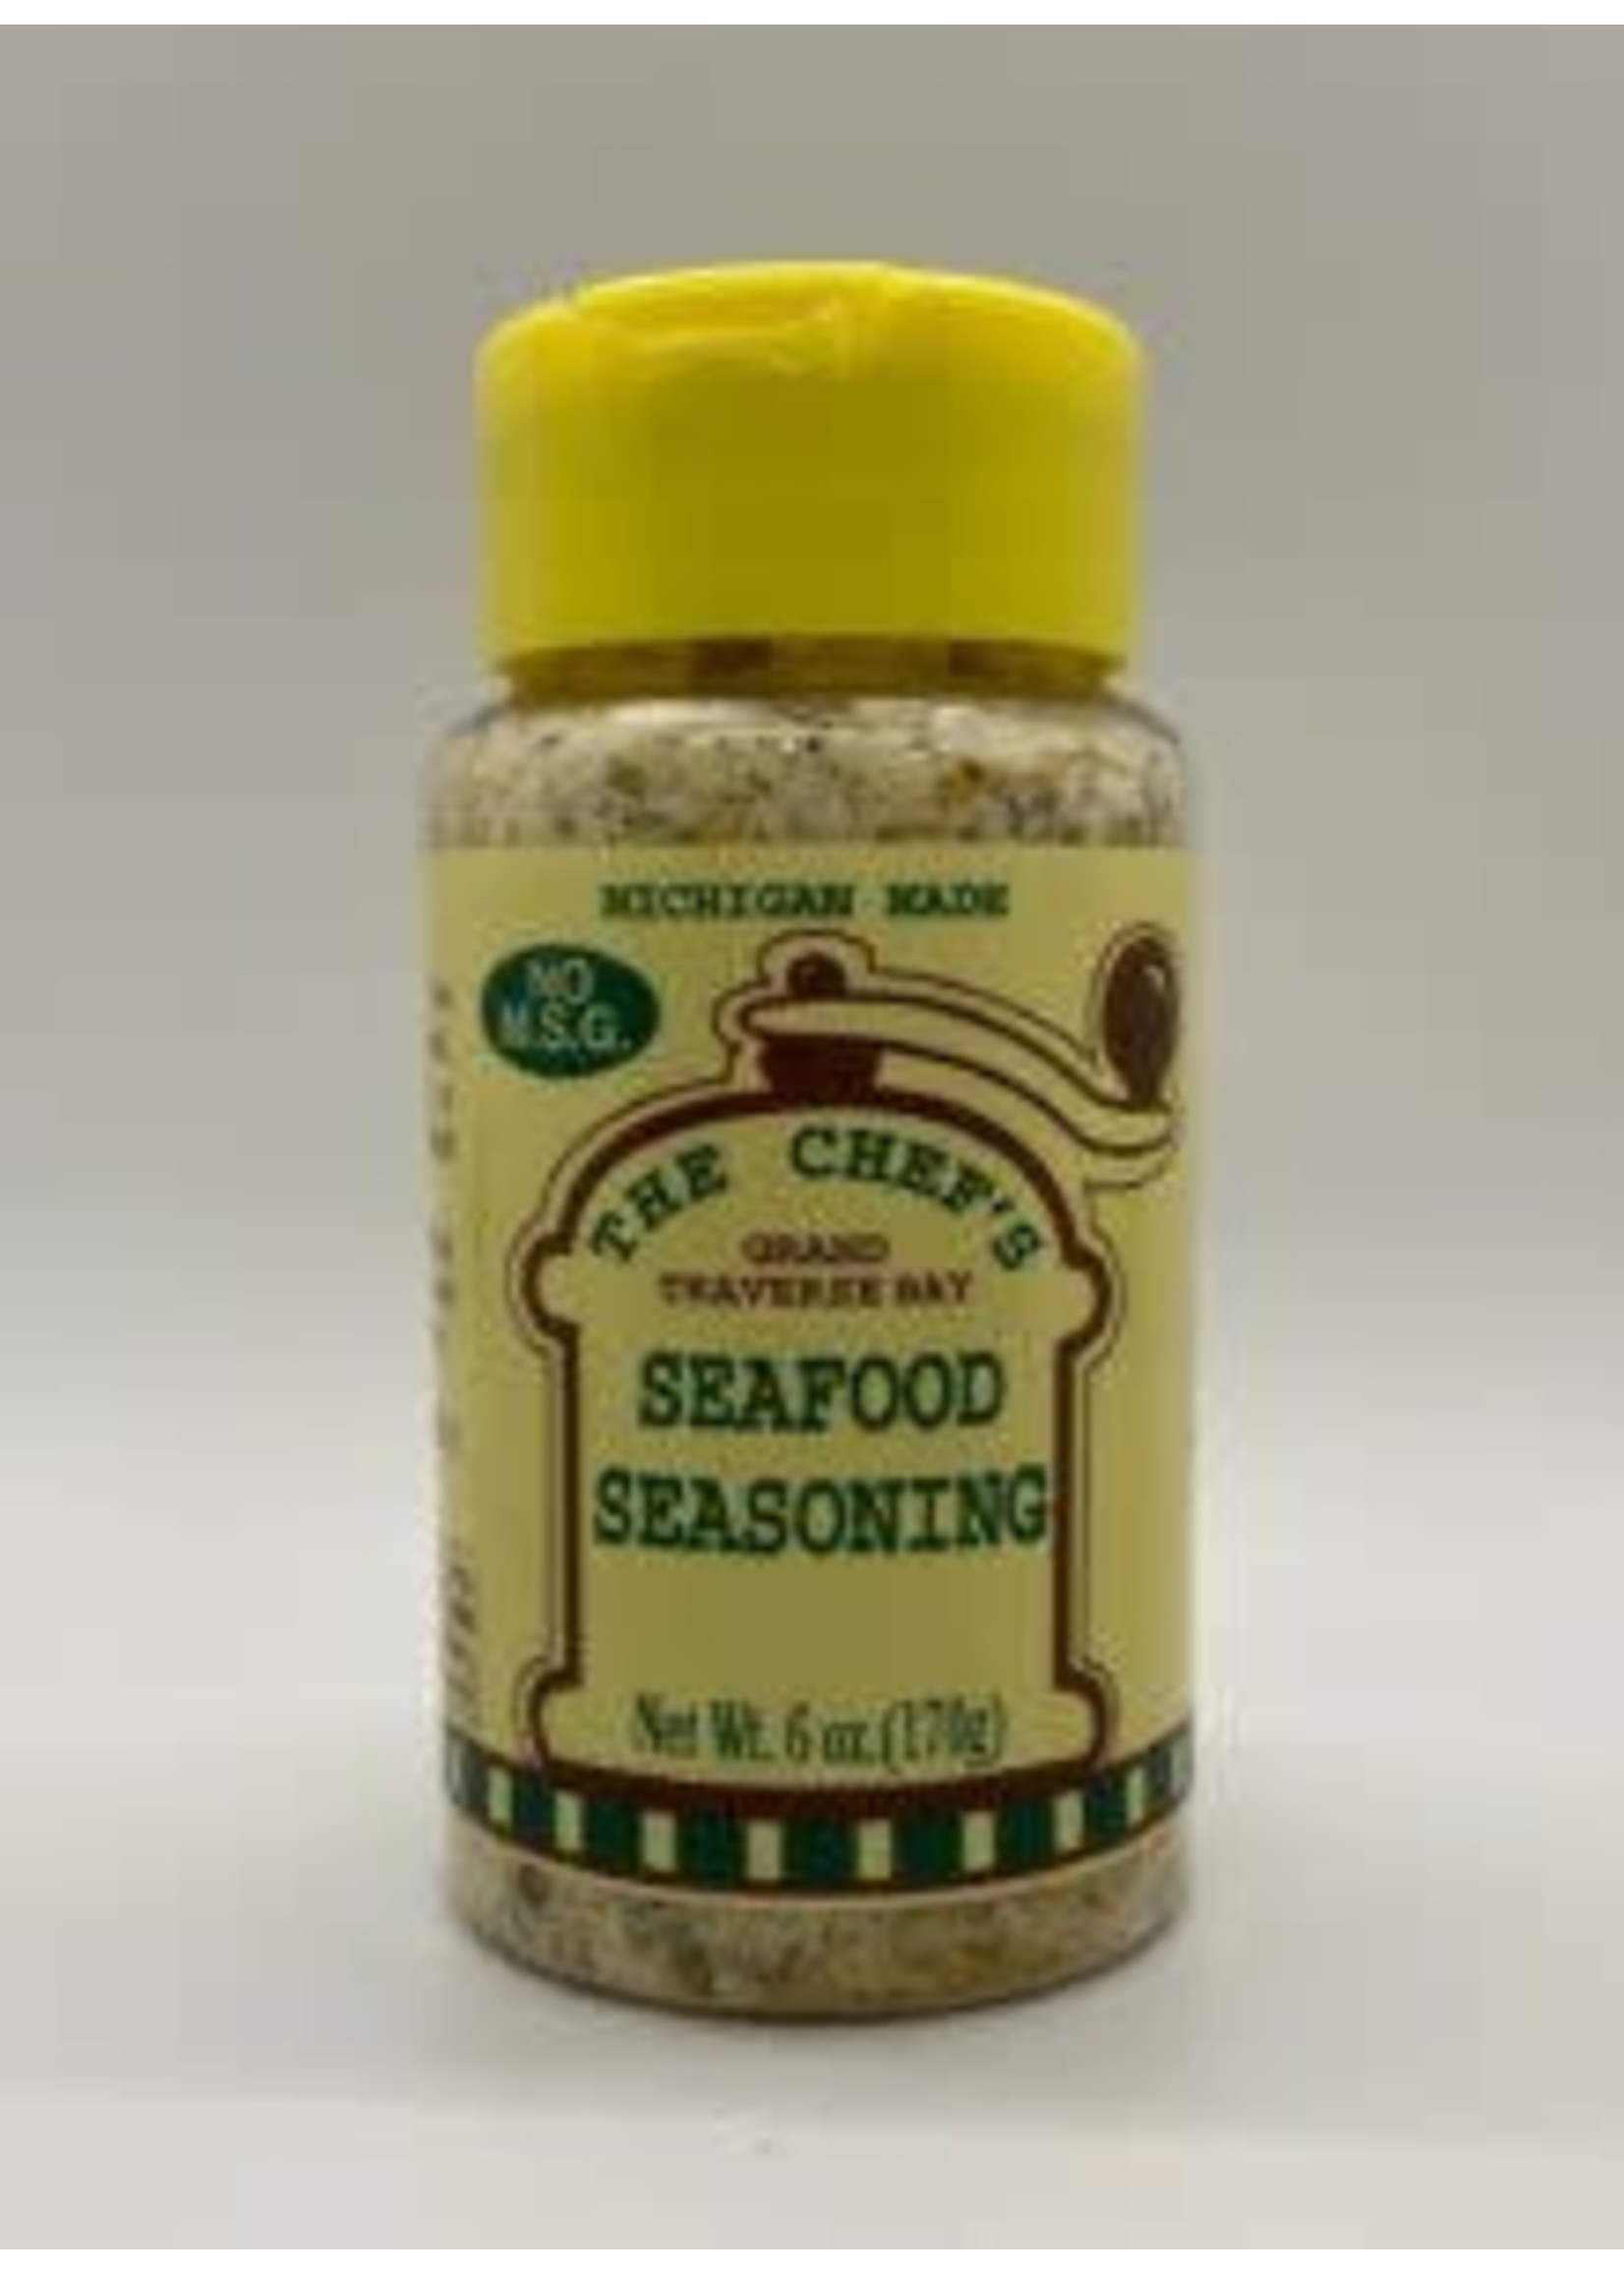 Alden's Mill House Alden's Mill House - Seafood Seasoning 5.5oz